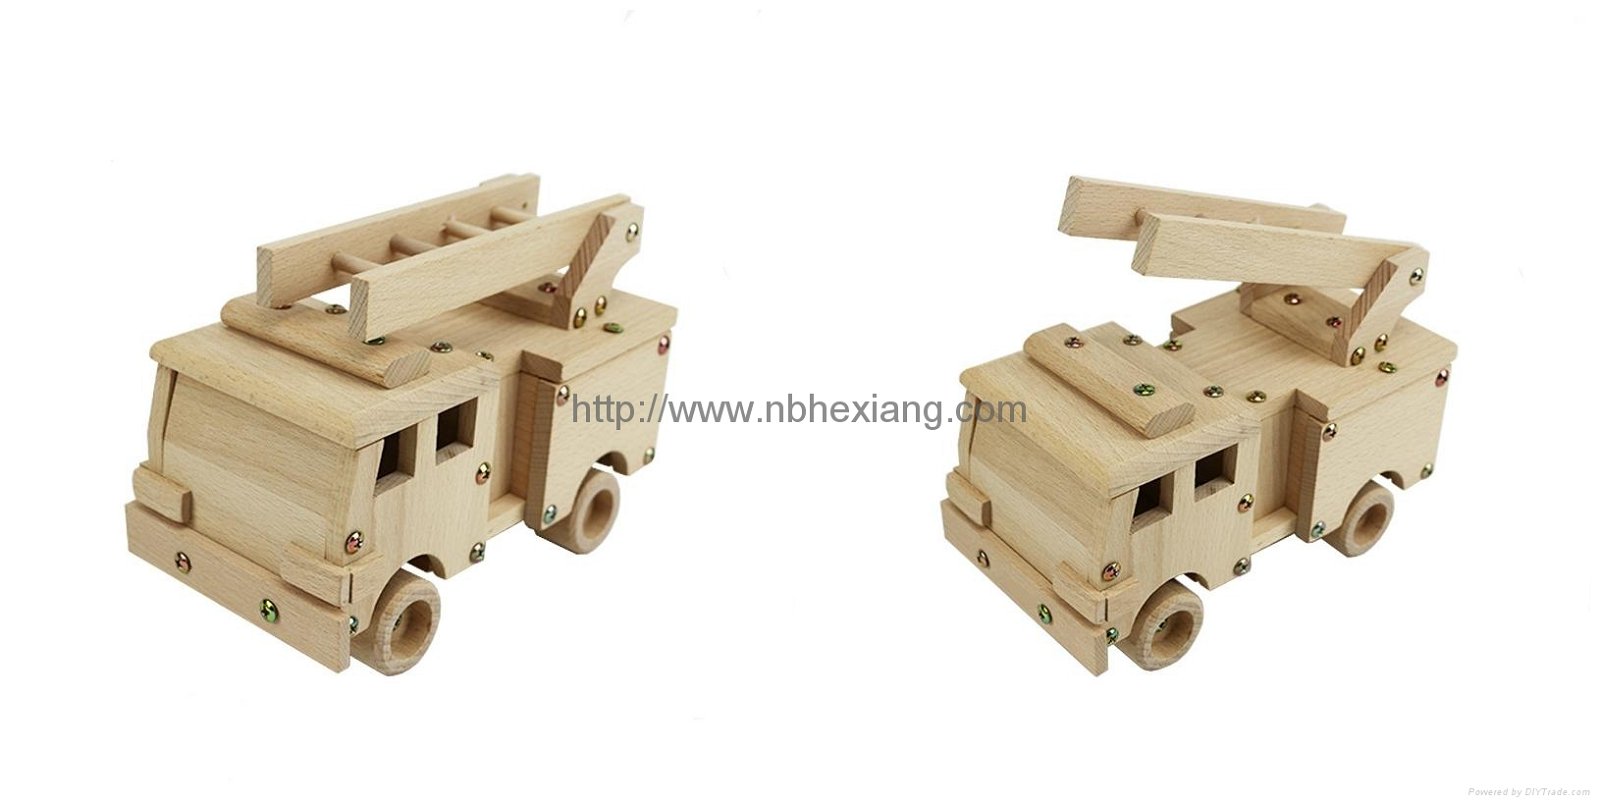 5 Transportation Styles Cube Wood Assembly Toy 3